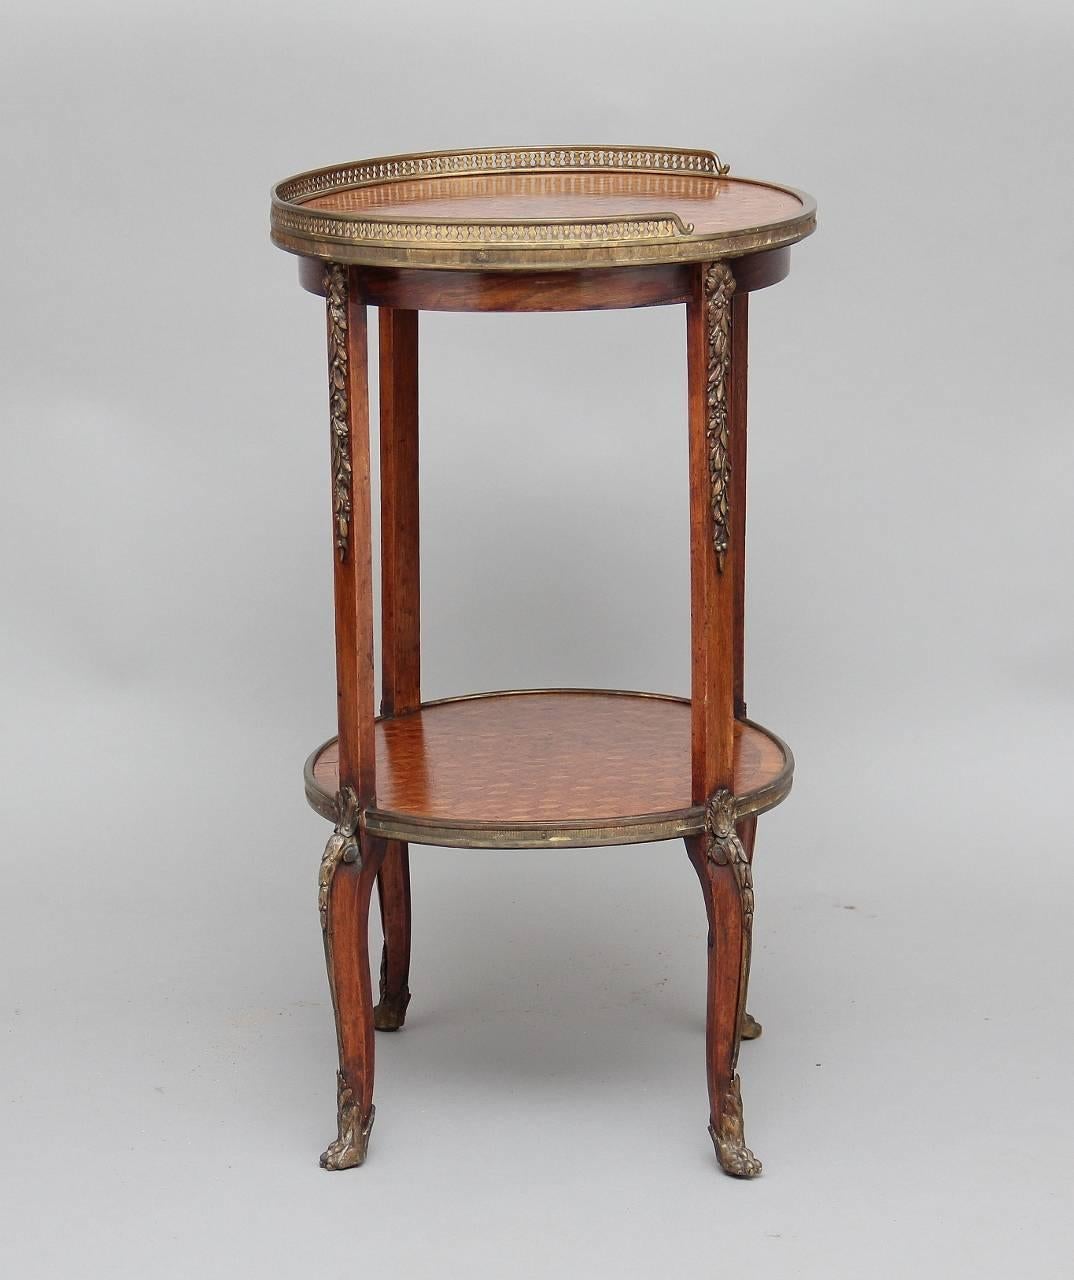 Victorian 19th Century French Kingwood Parquetry Etagere